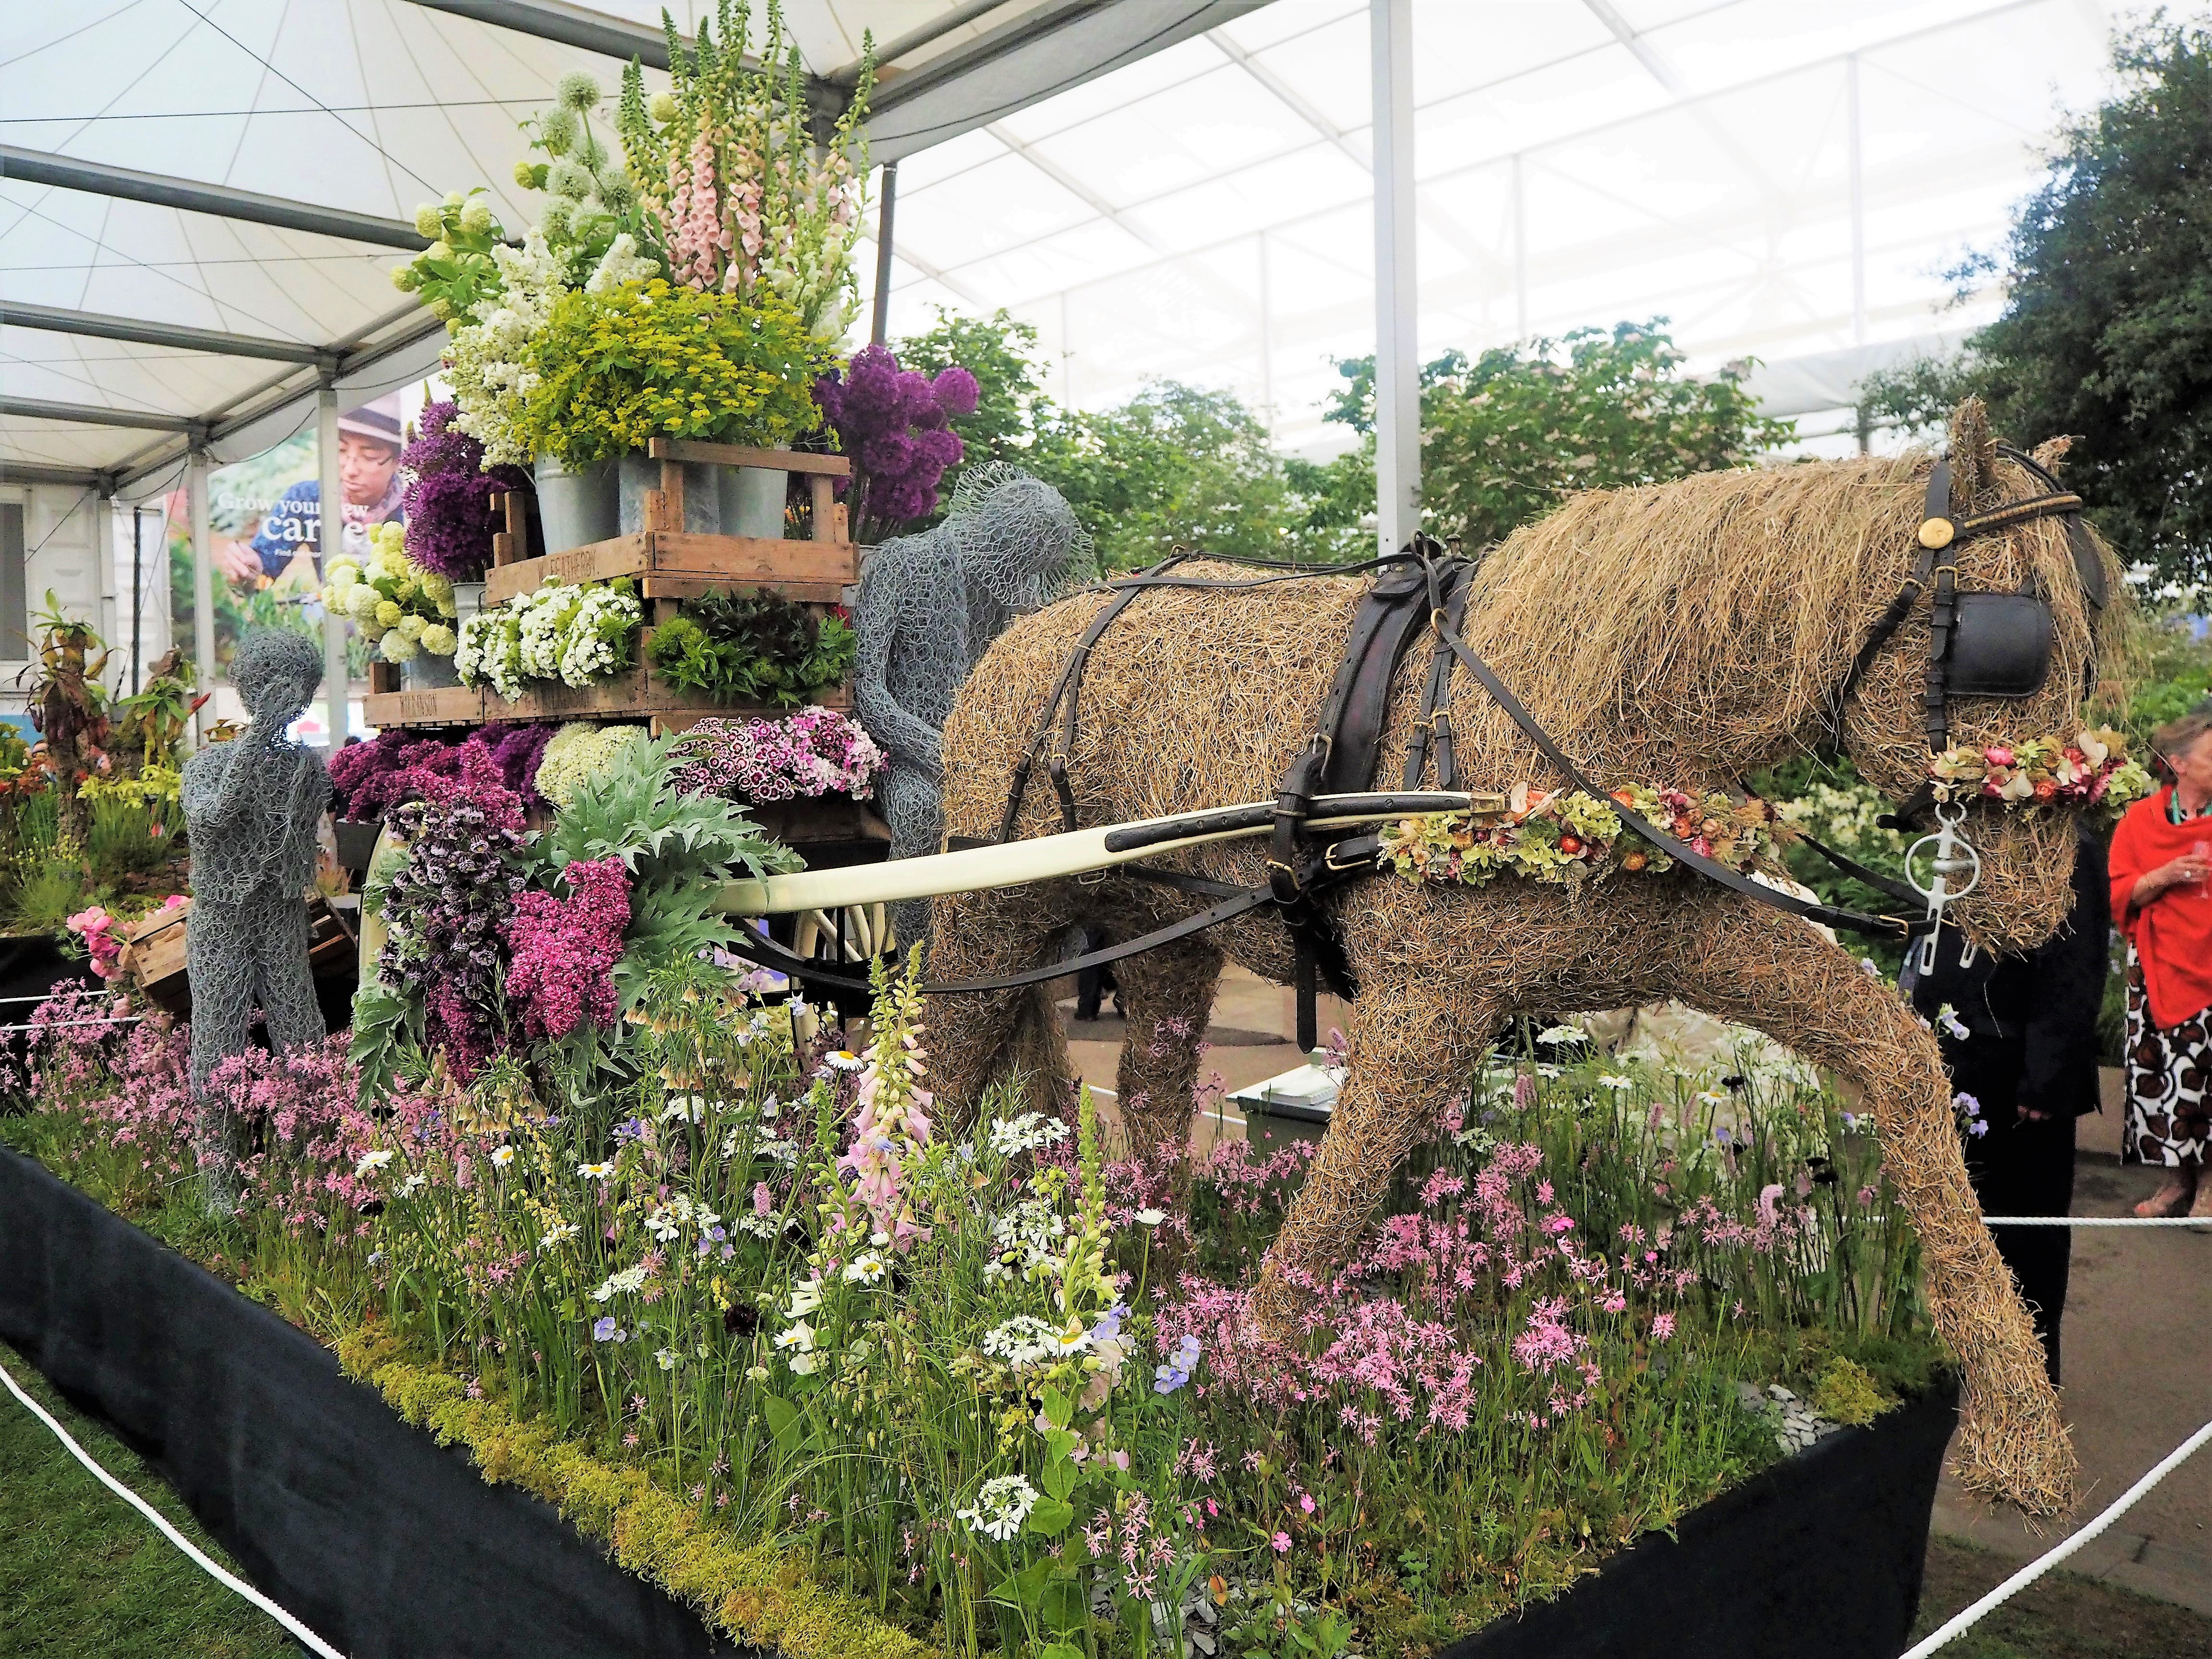 Flower display at Chelsea flower show 2018